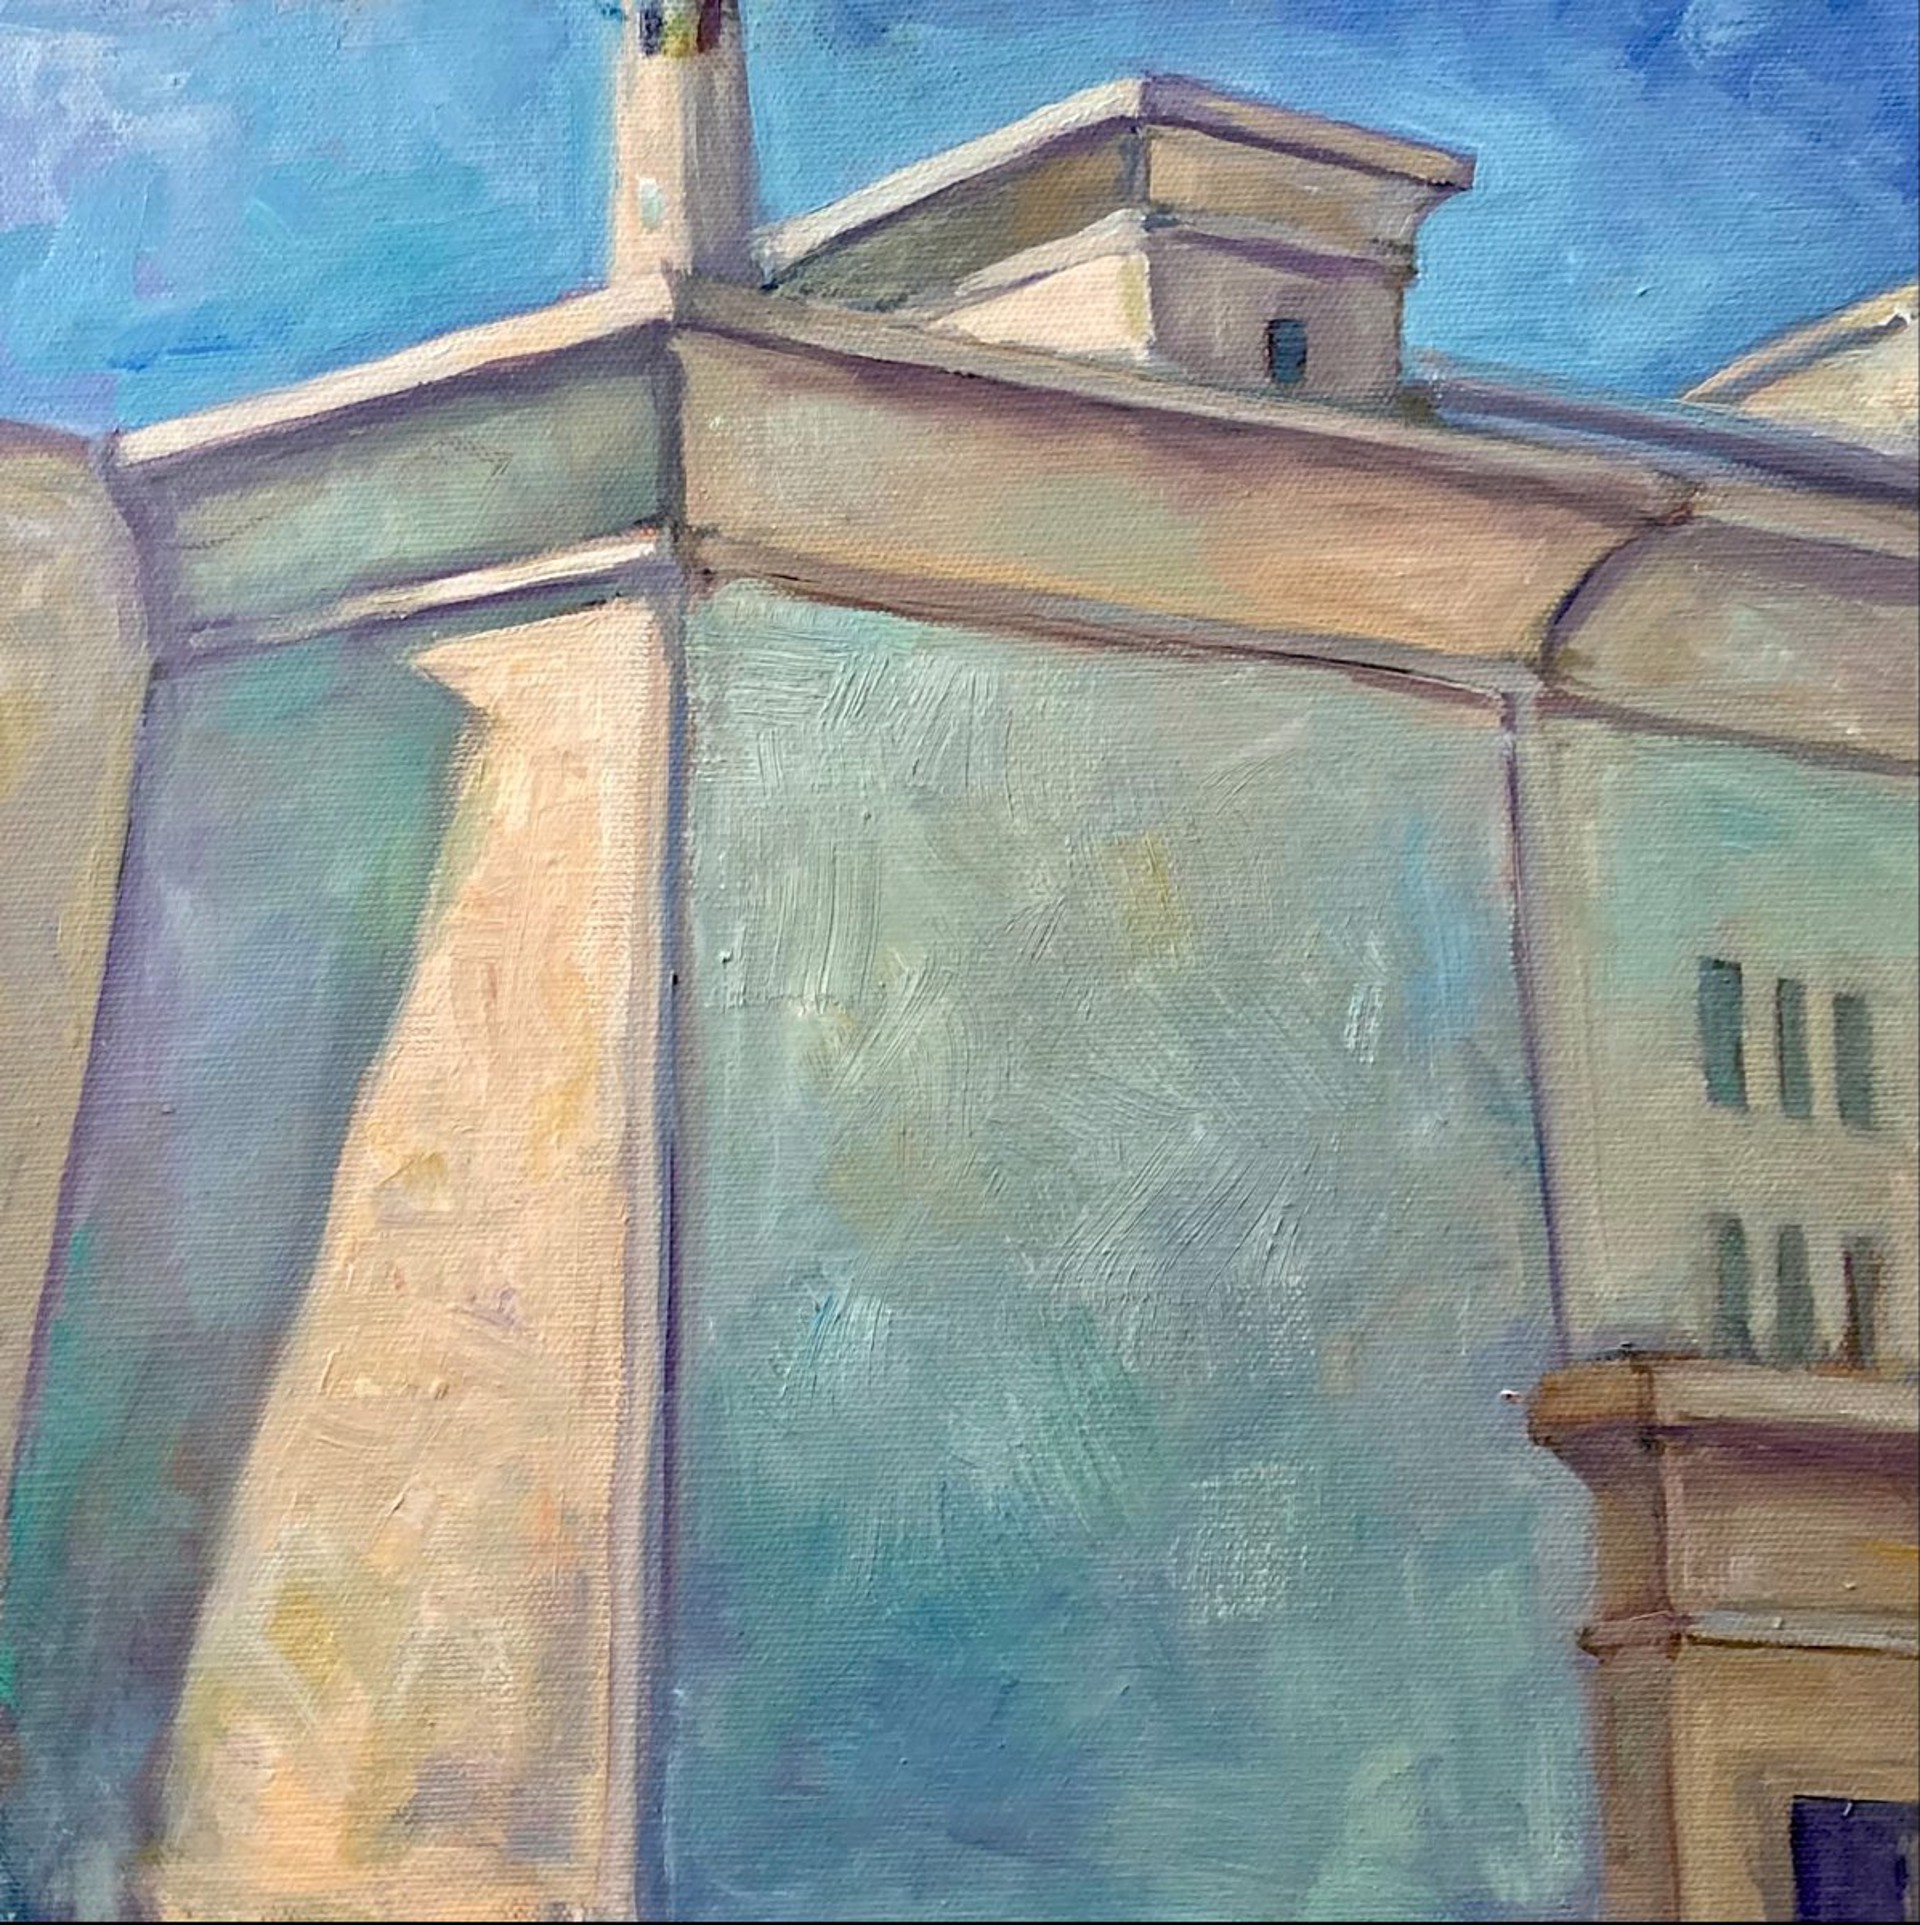 Scottish Rite Temple by Missy Patrick